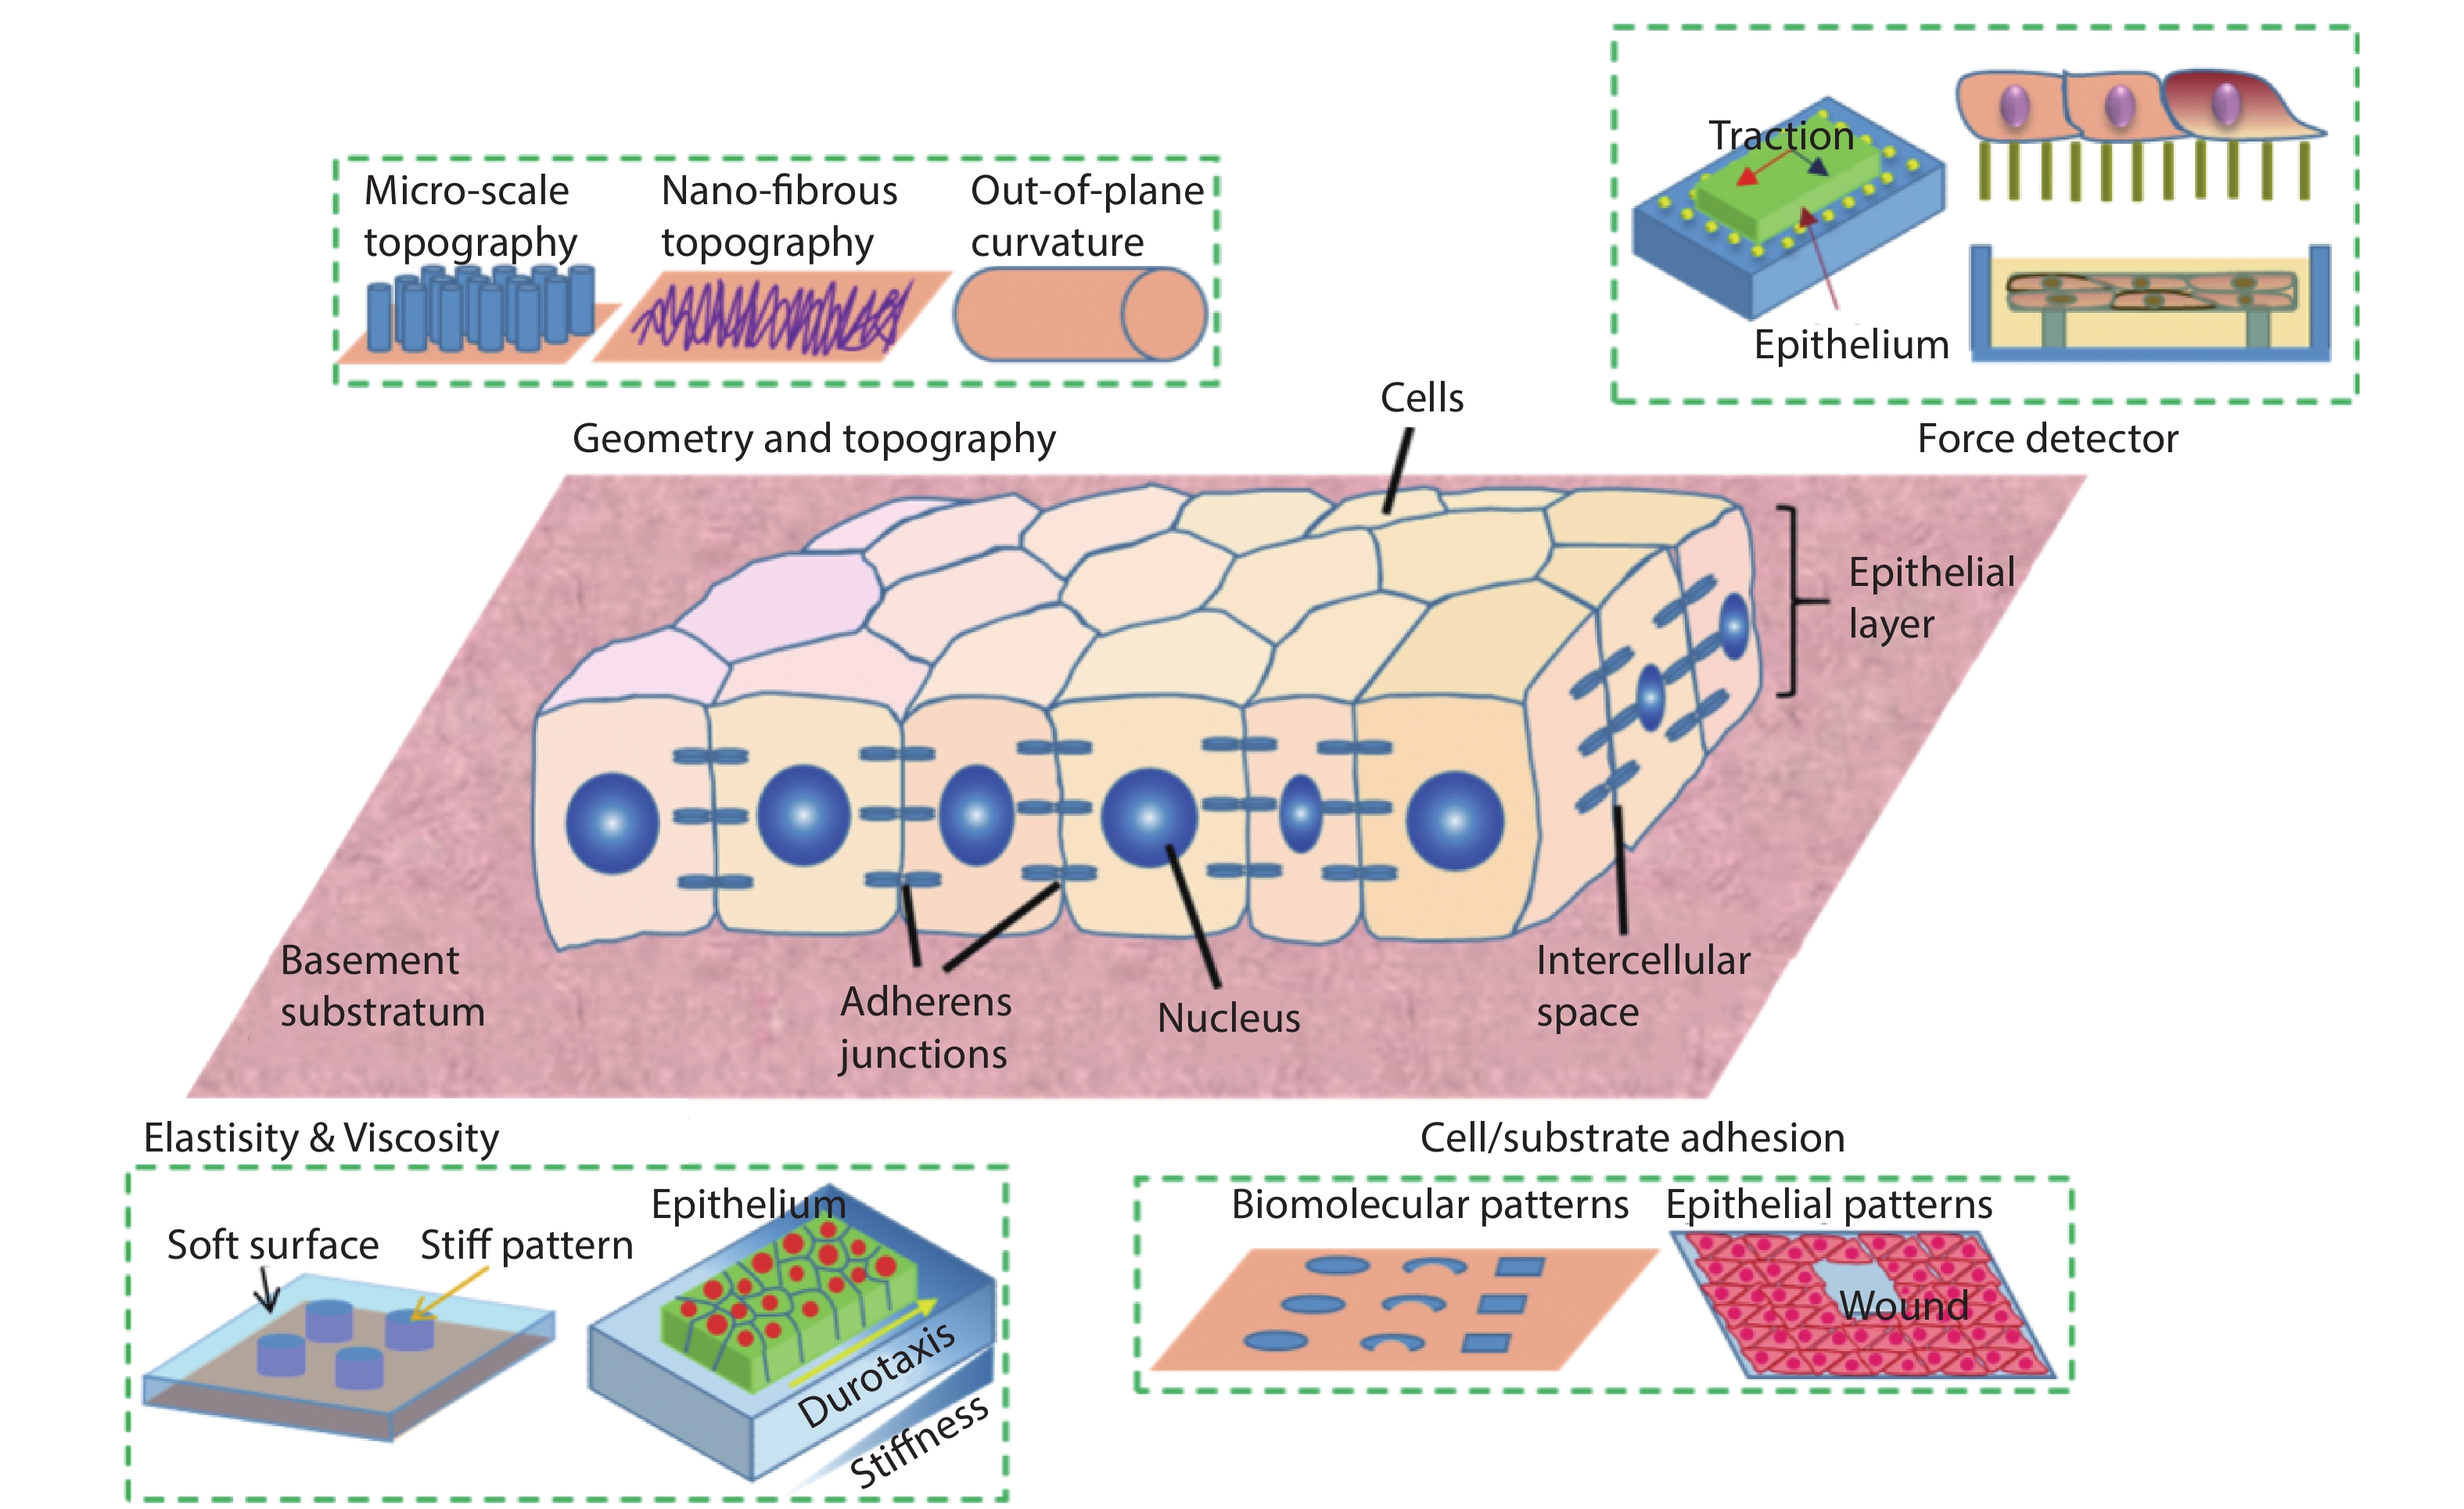 (Color online) Microengineered synthetic substrates for cell/tissue mechanics studies. The properties of a substratum can be modified to adjust the cell/material interactions, such as surface topographies, stiffness, and adhesiveness. In addition, mechanical probes can be integrated into the substrate to detect the force in tissue. These include microbeads in the traction force microscopy and elastomeric micro-pillars.